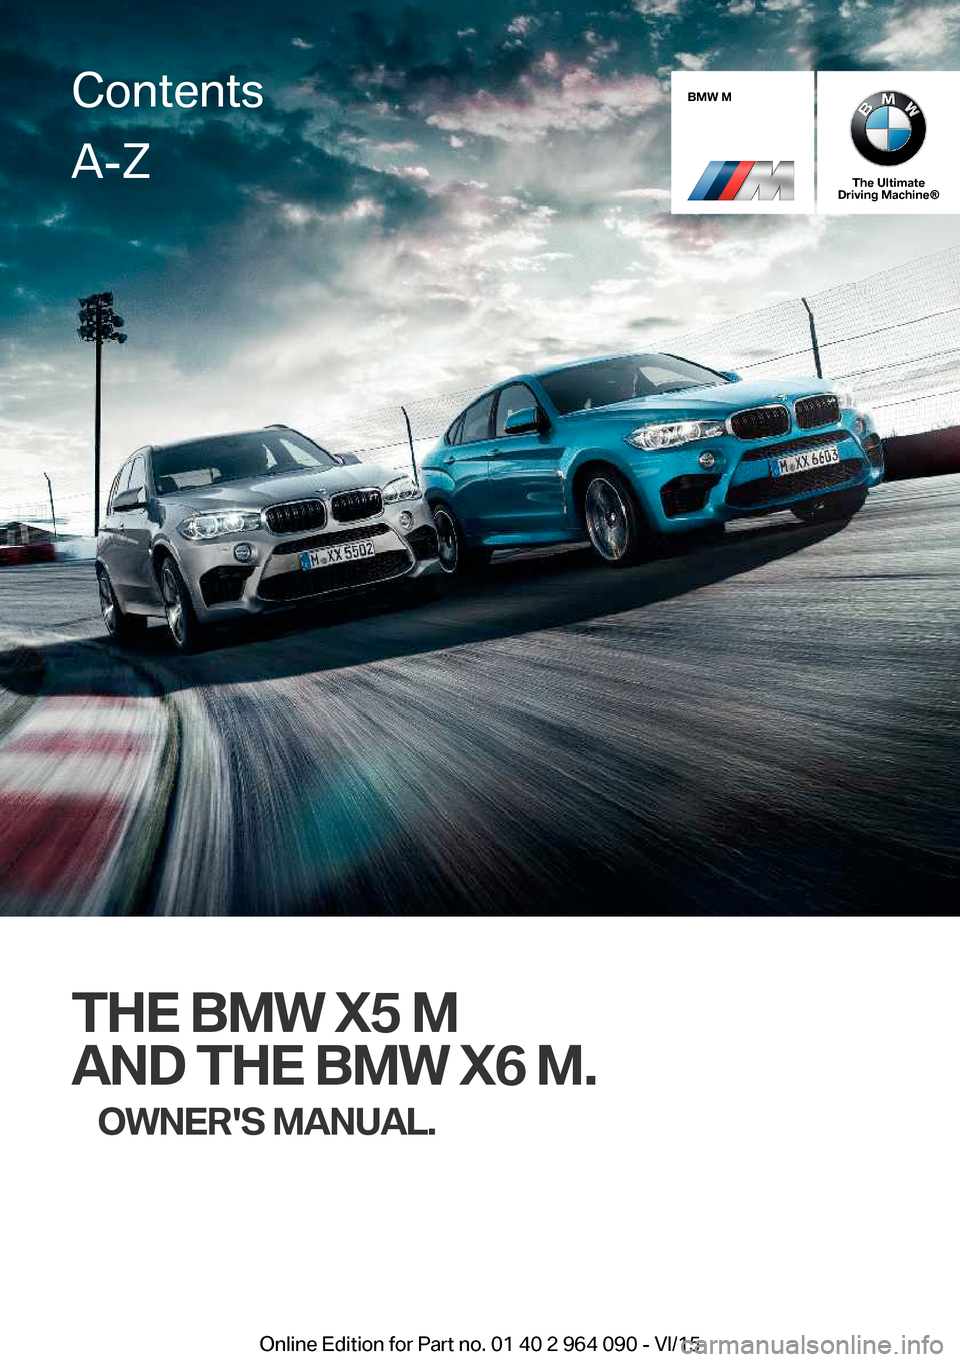 BMW X6M 2015 F86 Owners Manual BMW M
The Ultimate
Driving Machine®
THE BMW X5 M
AND THE BMW X6 M. OWNERS MANUAL.
ContentsA-Z
Online Edition for Part no. 01 40 2 964 090 - VI/15   